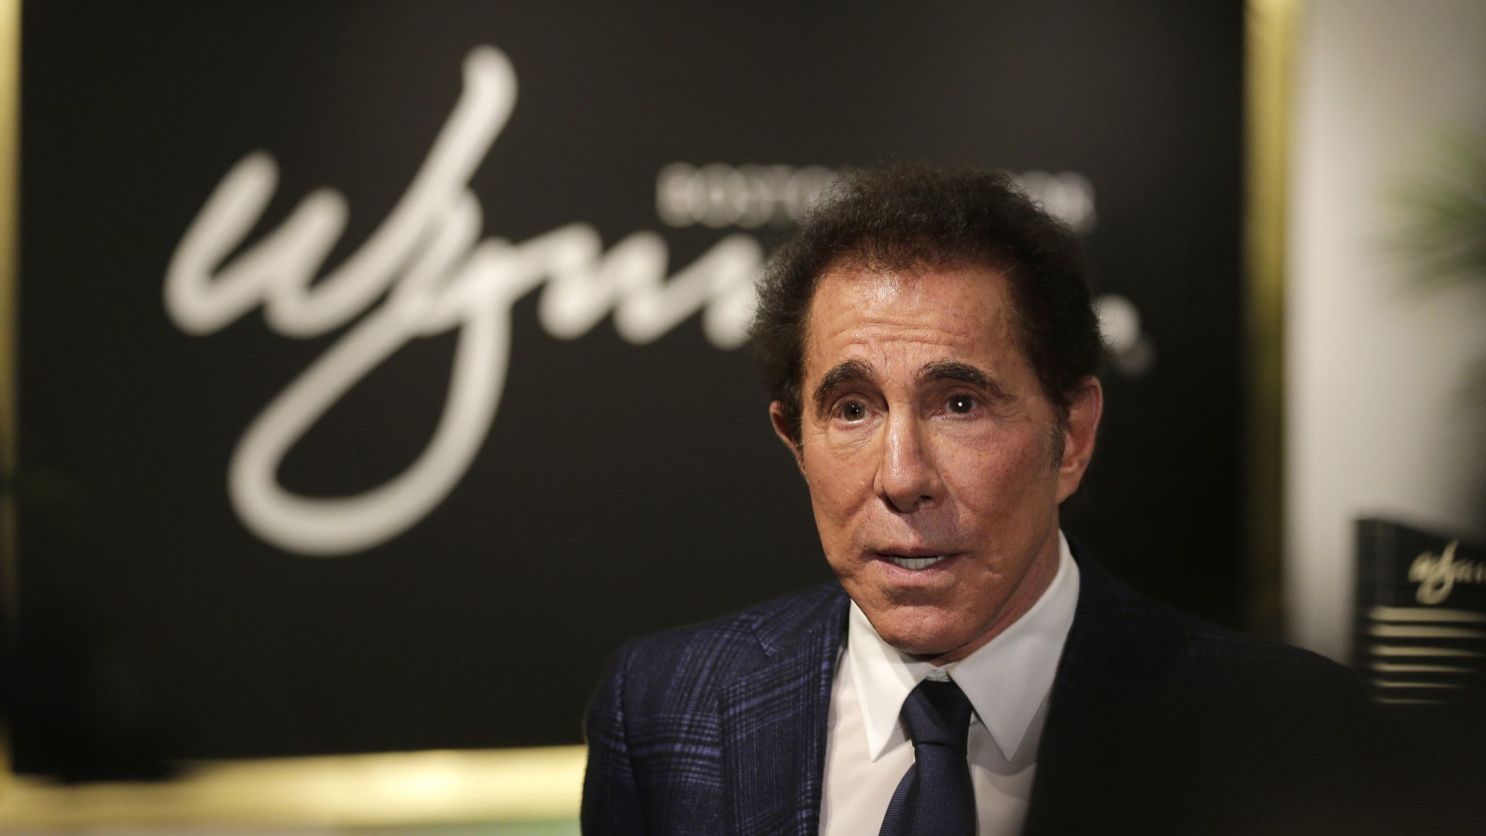 Oakland Raiders Move Best Thing Ever for Las Vegas, According to Steve Wynn